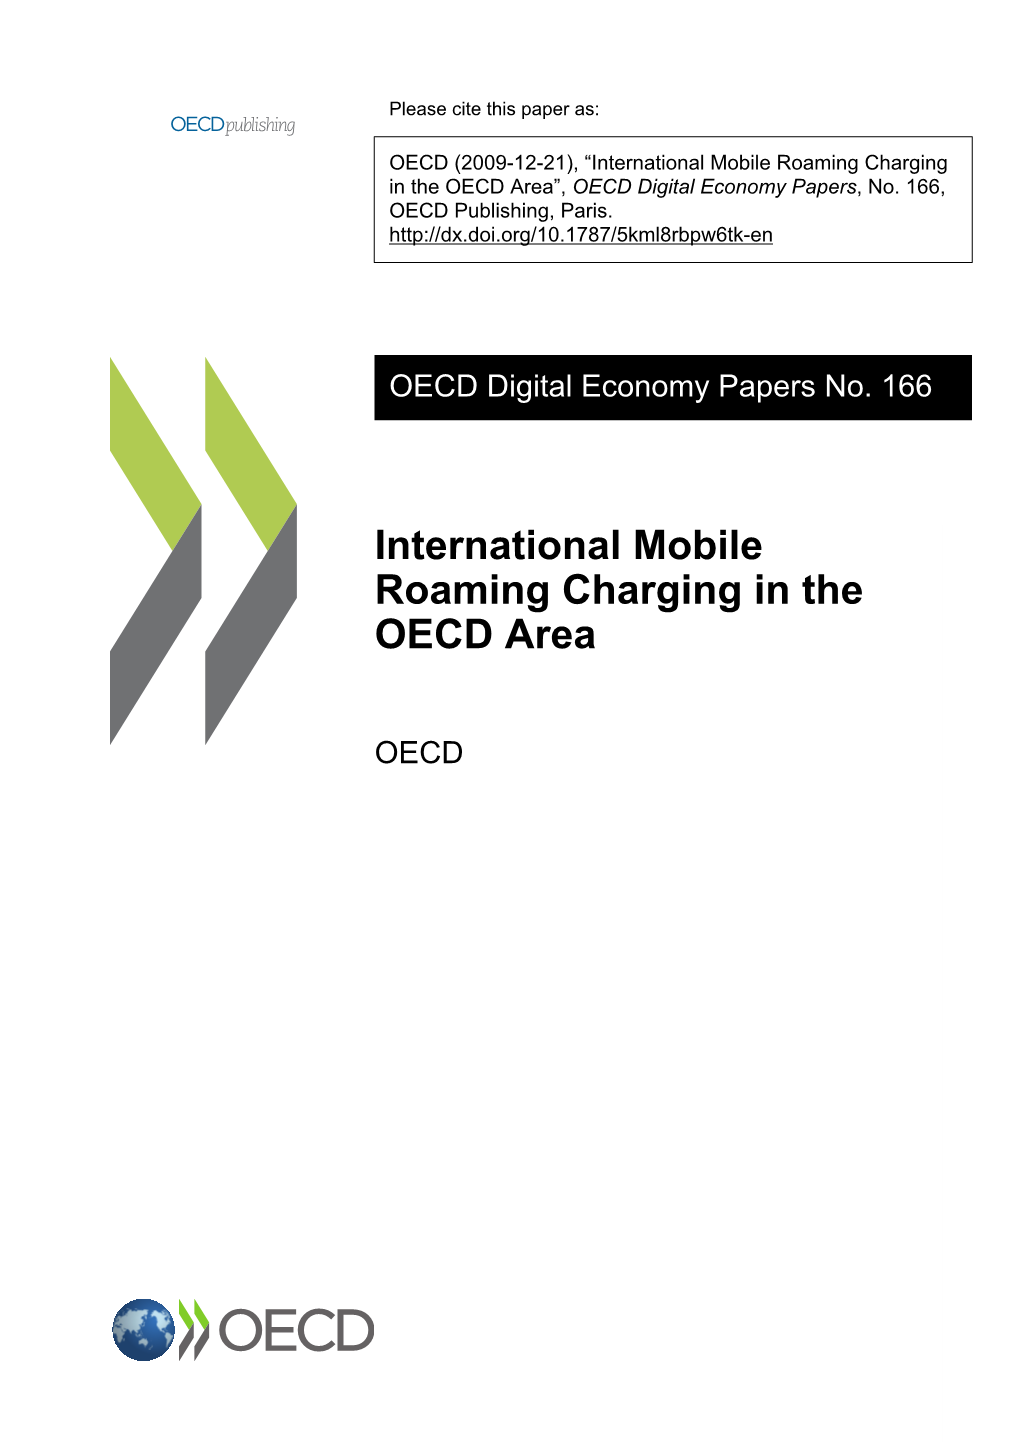 International Mobile Roaming Charging in the OECD Area”, OECD Digital Economy Papers, No